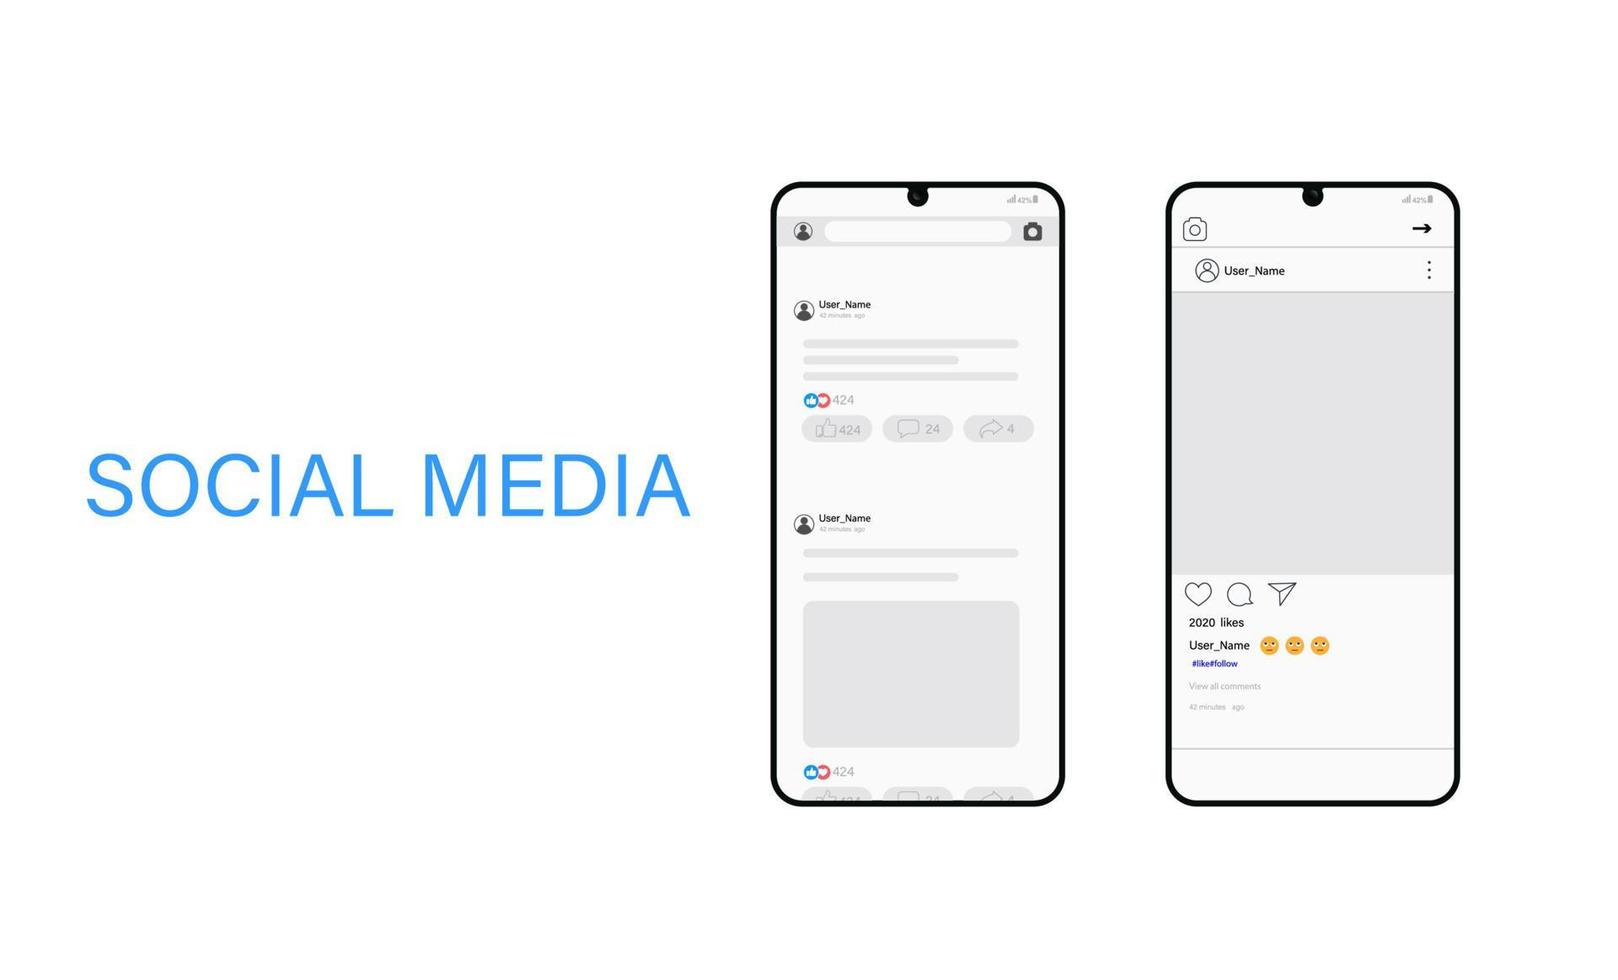 Two chat screens templates on realistic black smartphones. Contacts page mockup and text bubbles messages, and send media file. Vector editable illustration. Social media concept.